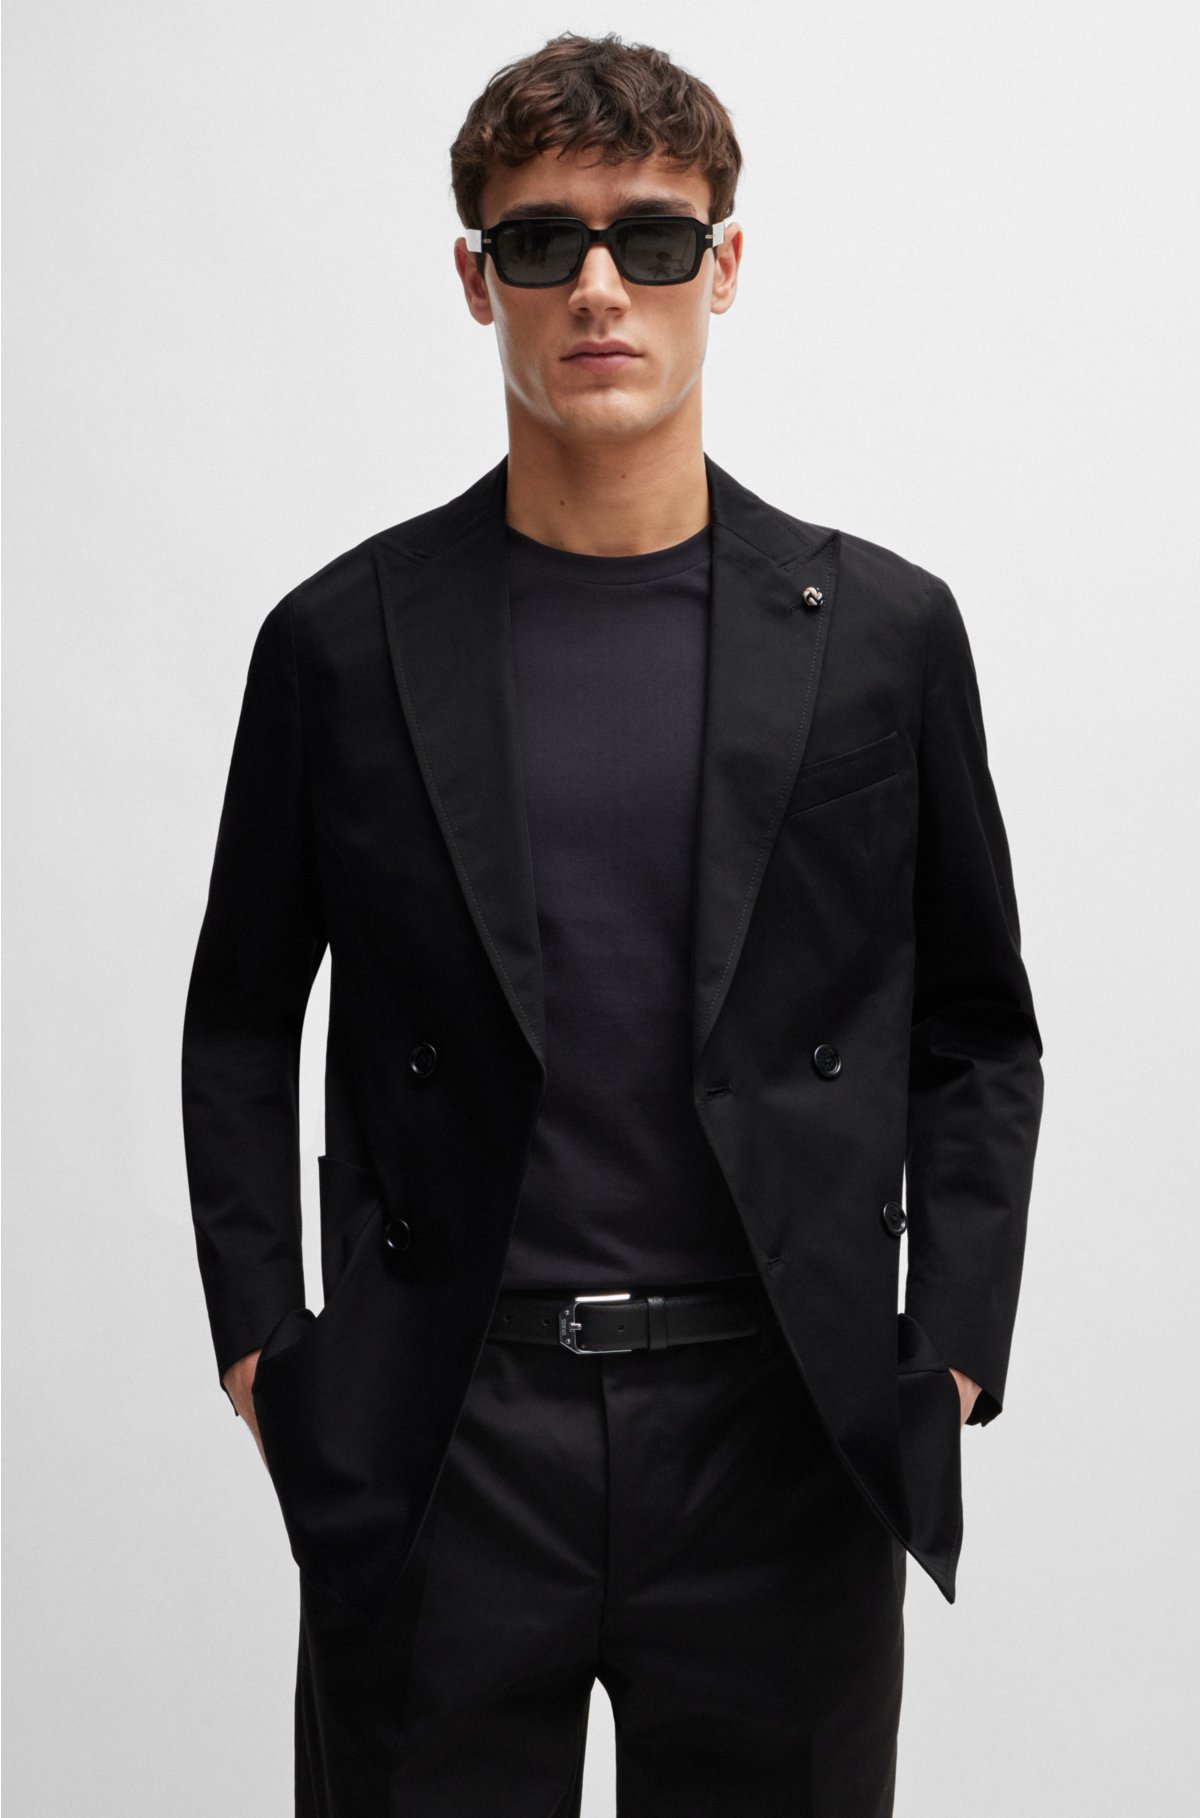 Slim-fit double-breasted jacket in stretch cotton, Black